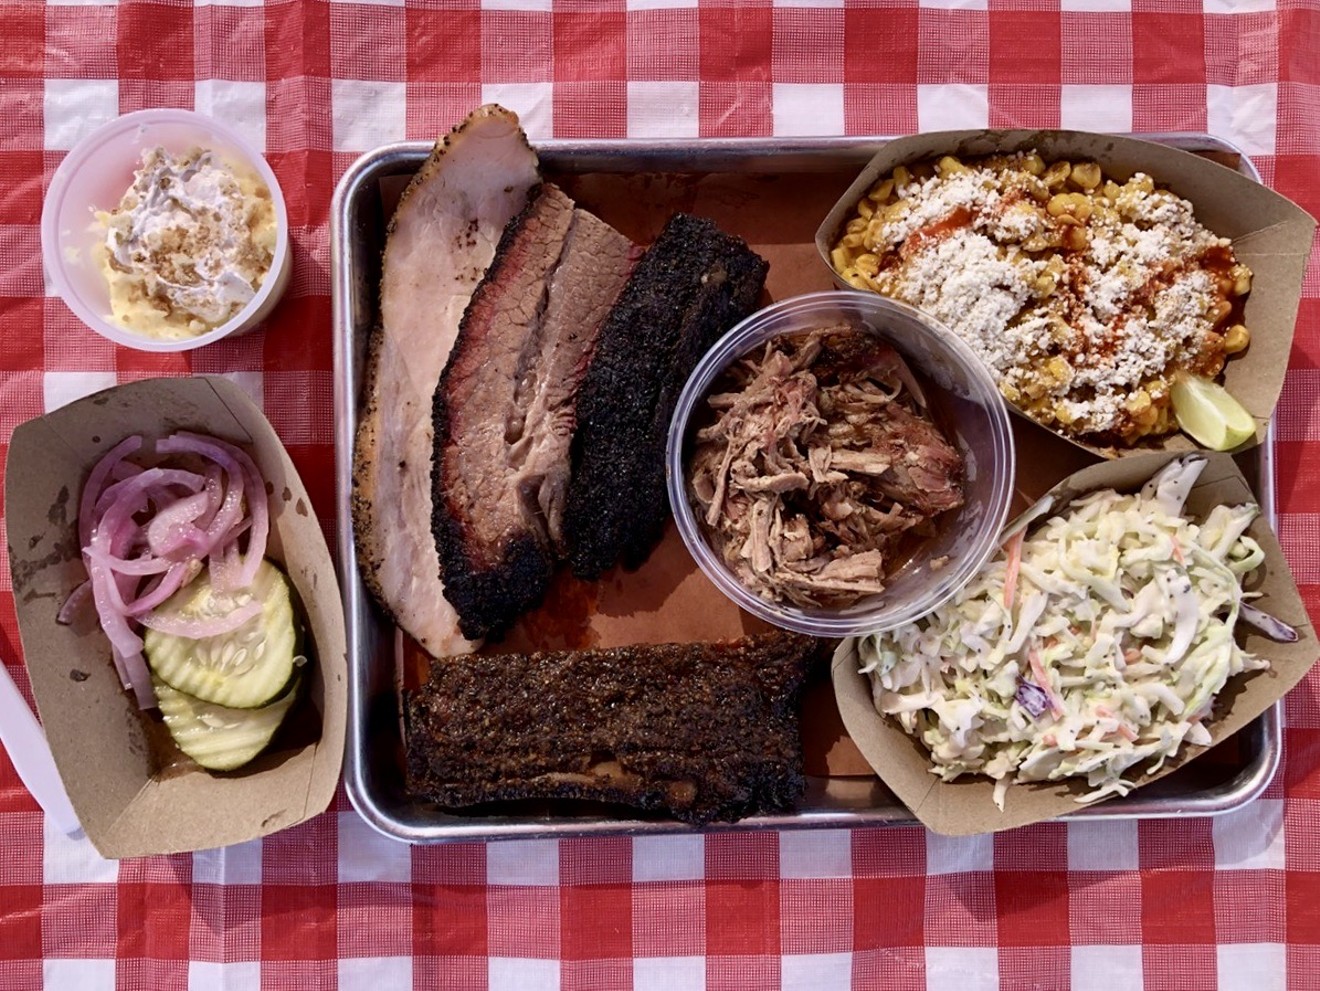 Four meats, two sides, pickles, and banana cream pudding from Eric's Family Barbecue.